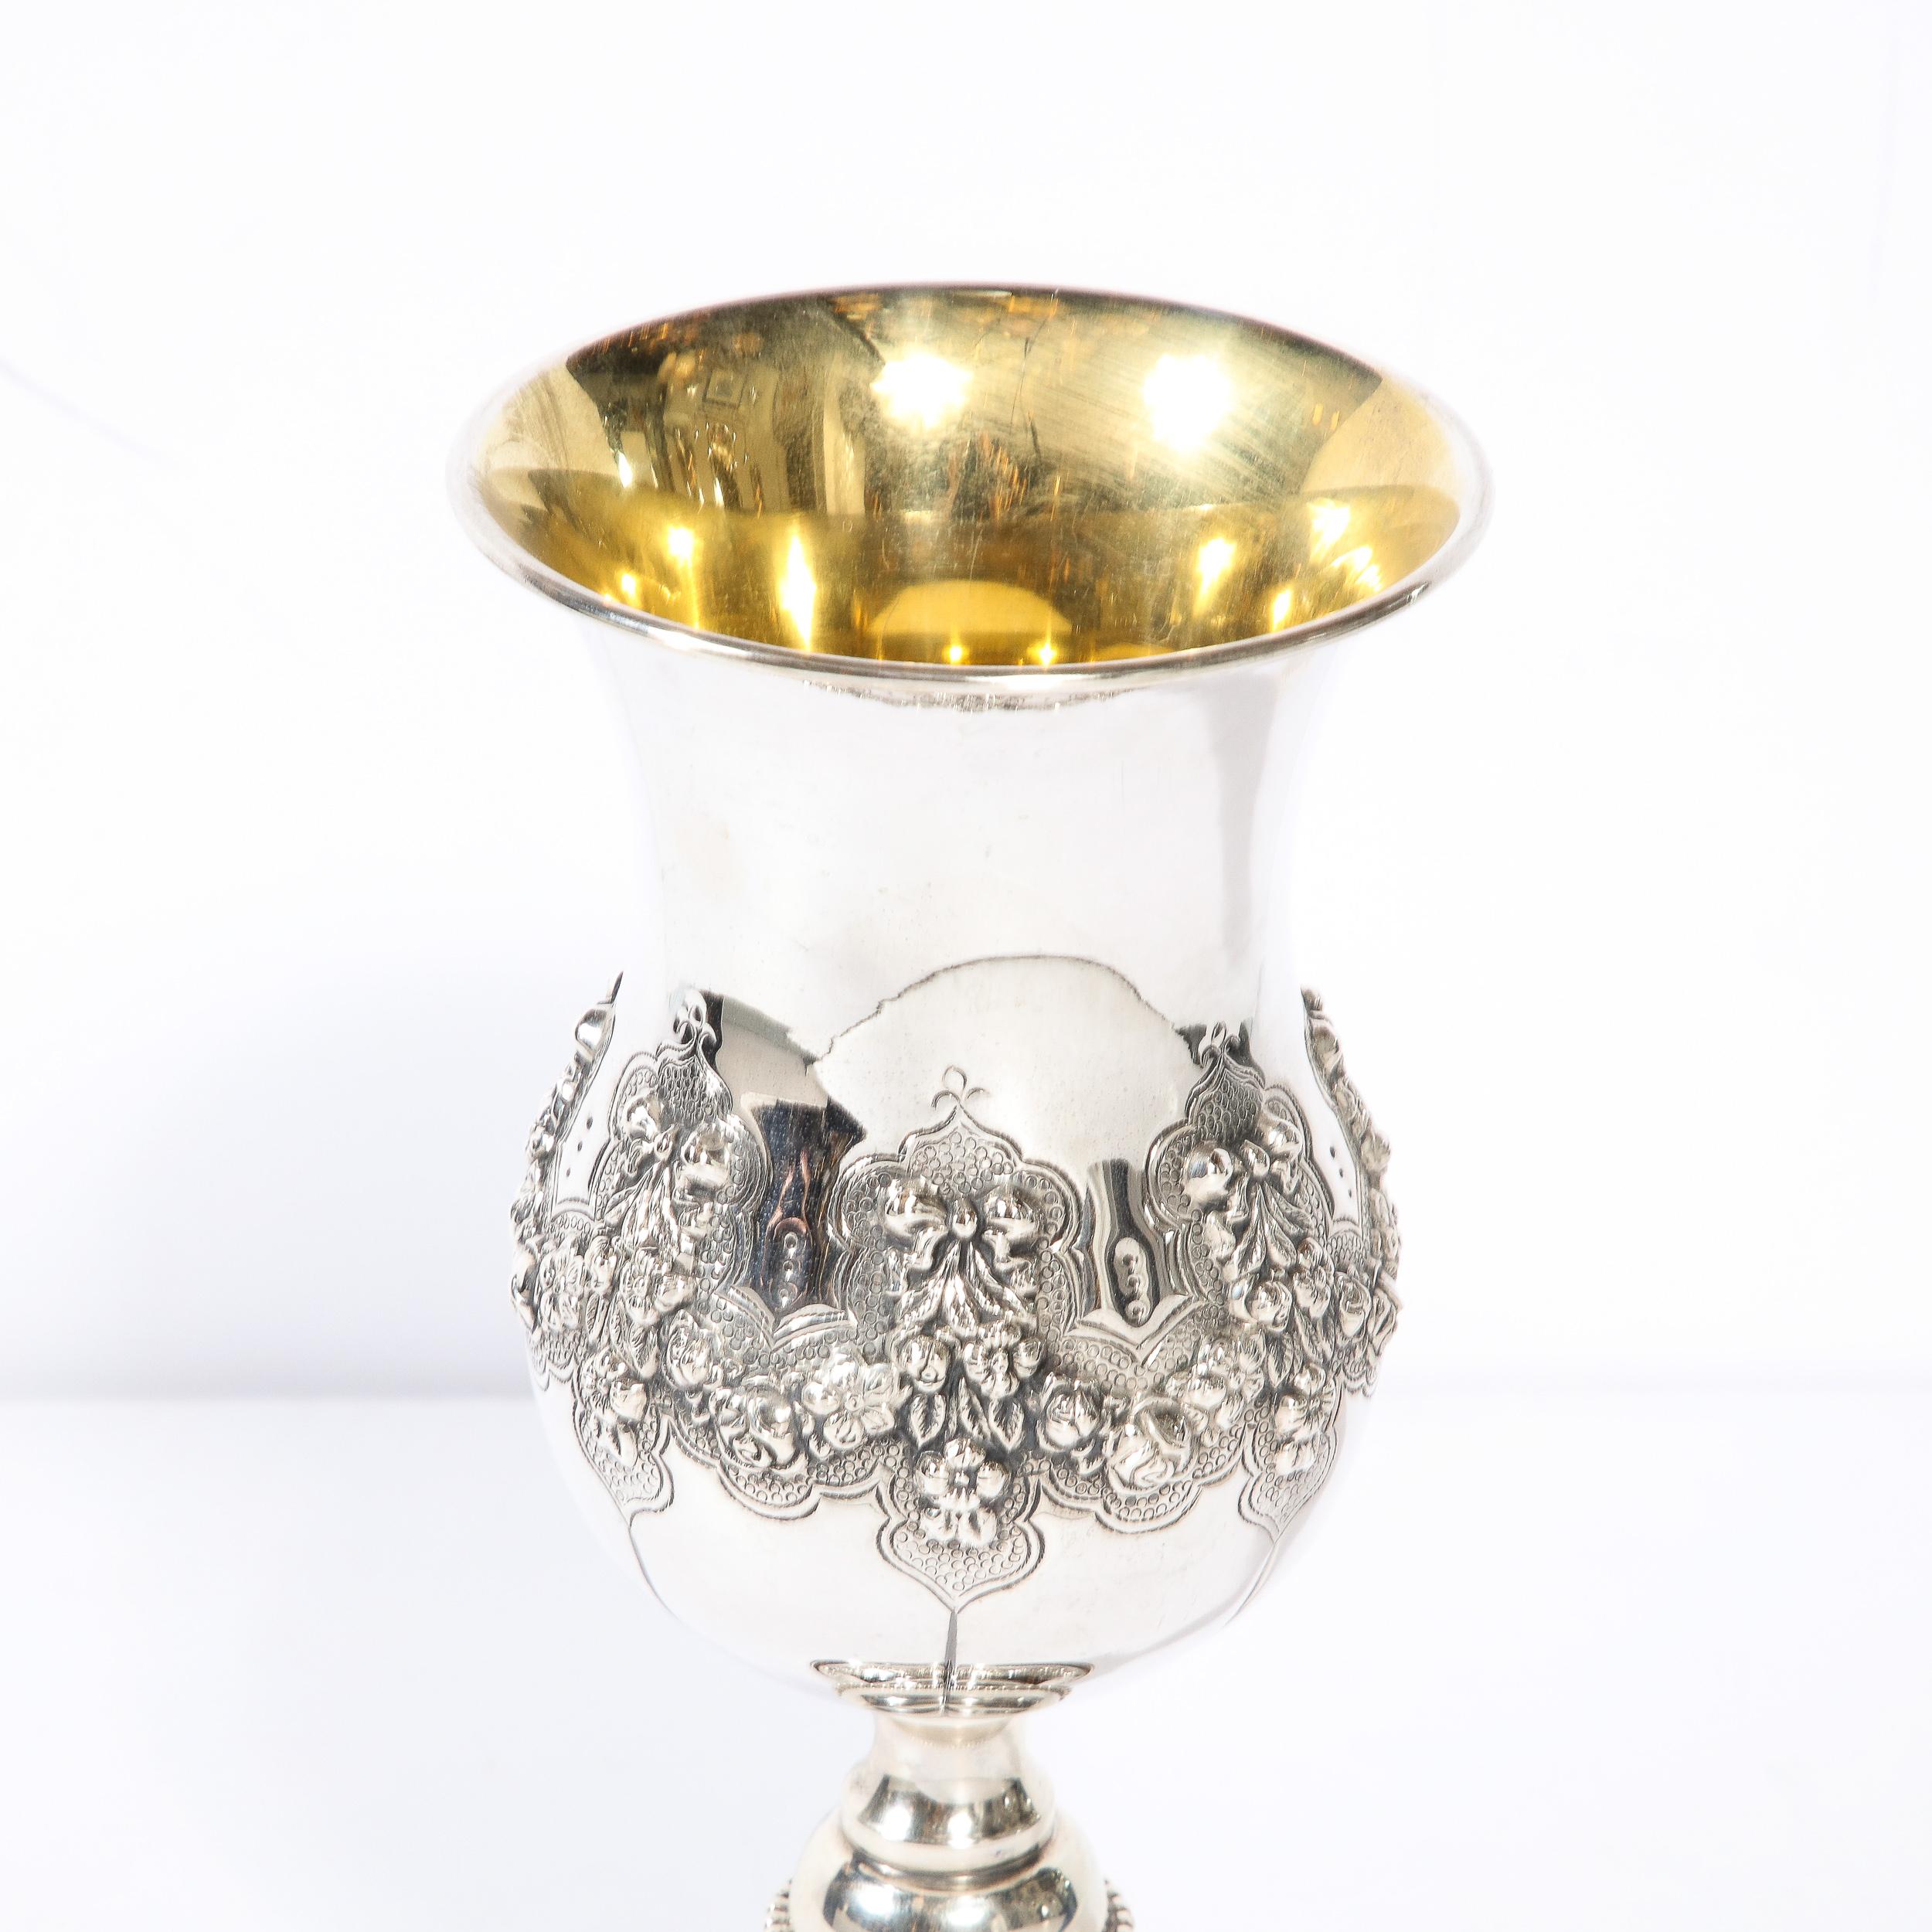 Modern Monumental Sterling  Kiddish Goblet with Repousse Designs  by Hadad Brothers For Sale